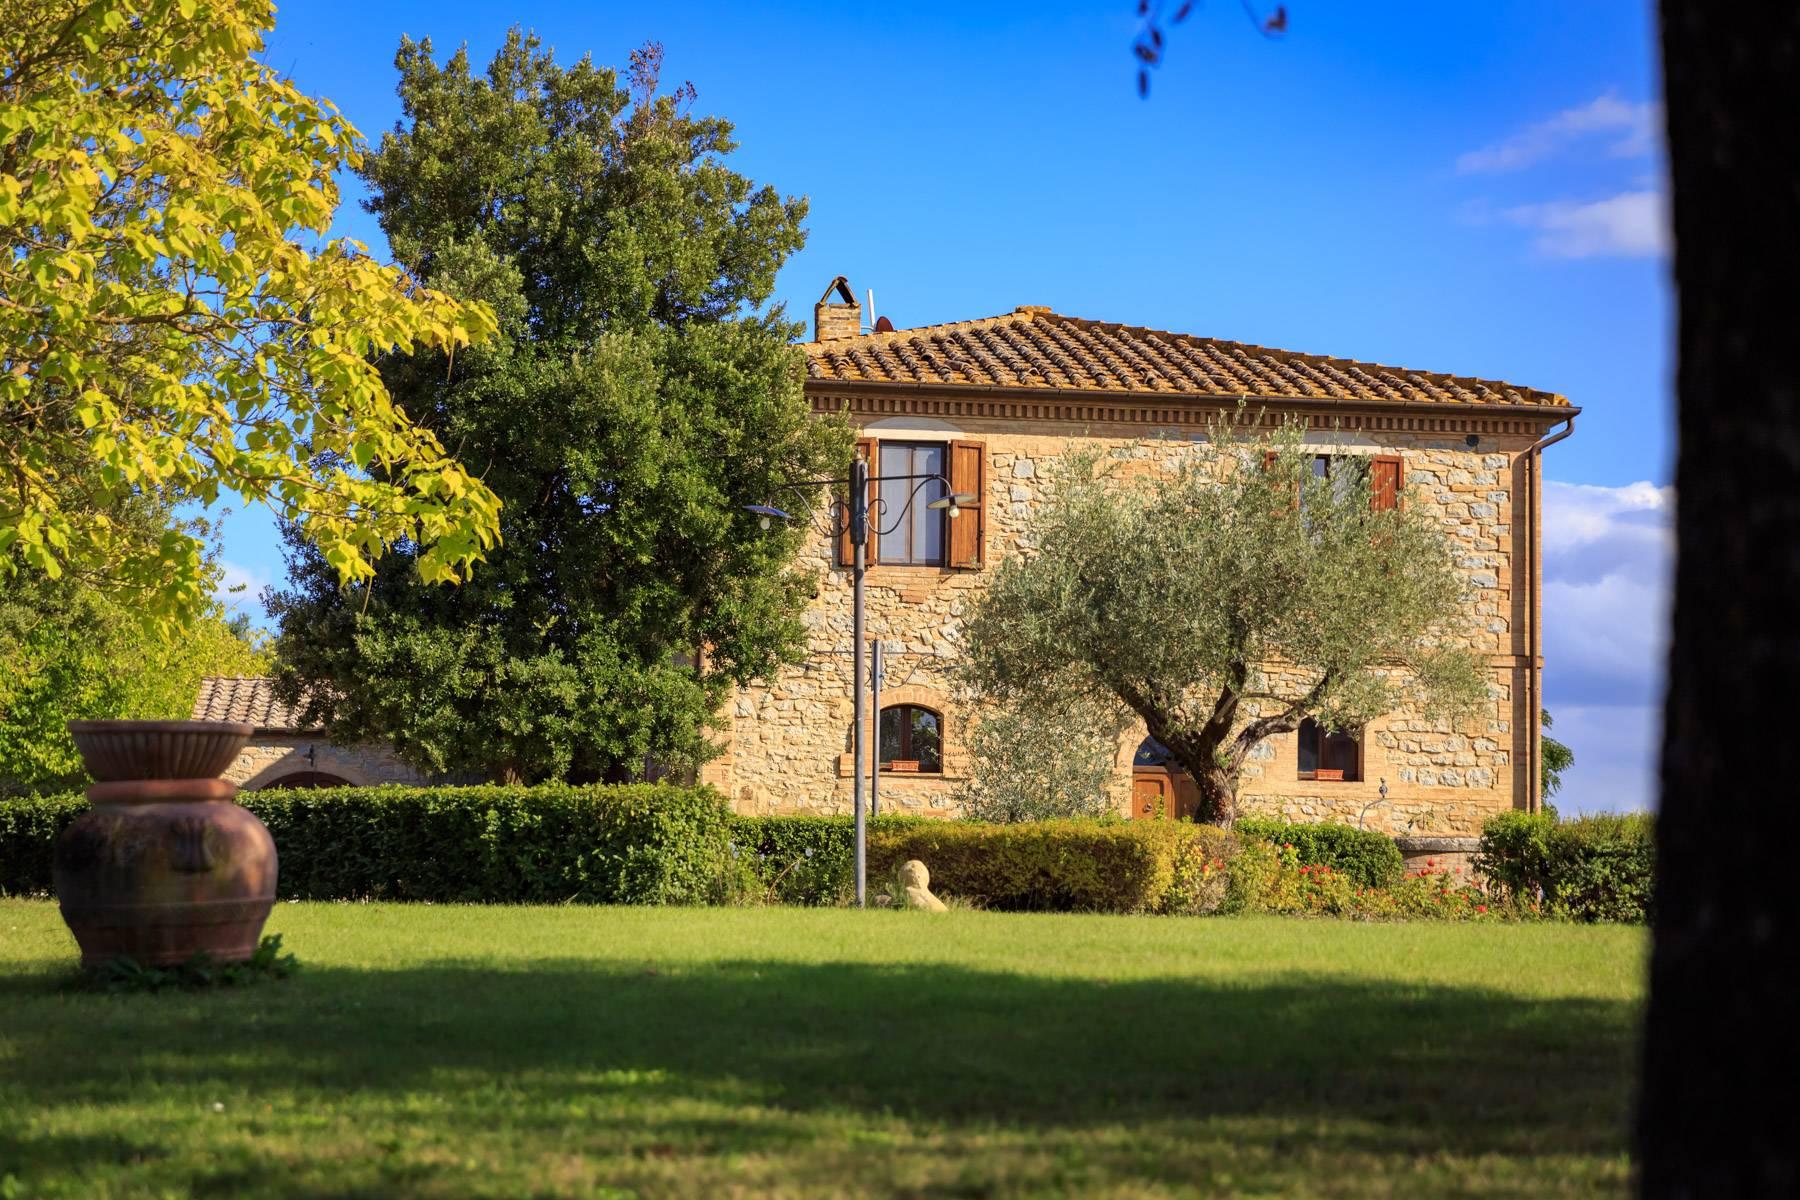 Exclusive property close to Siena - 3